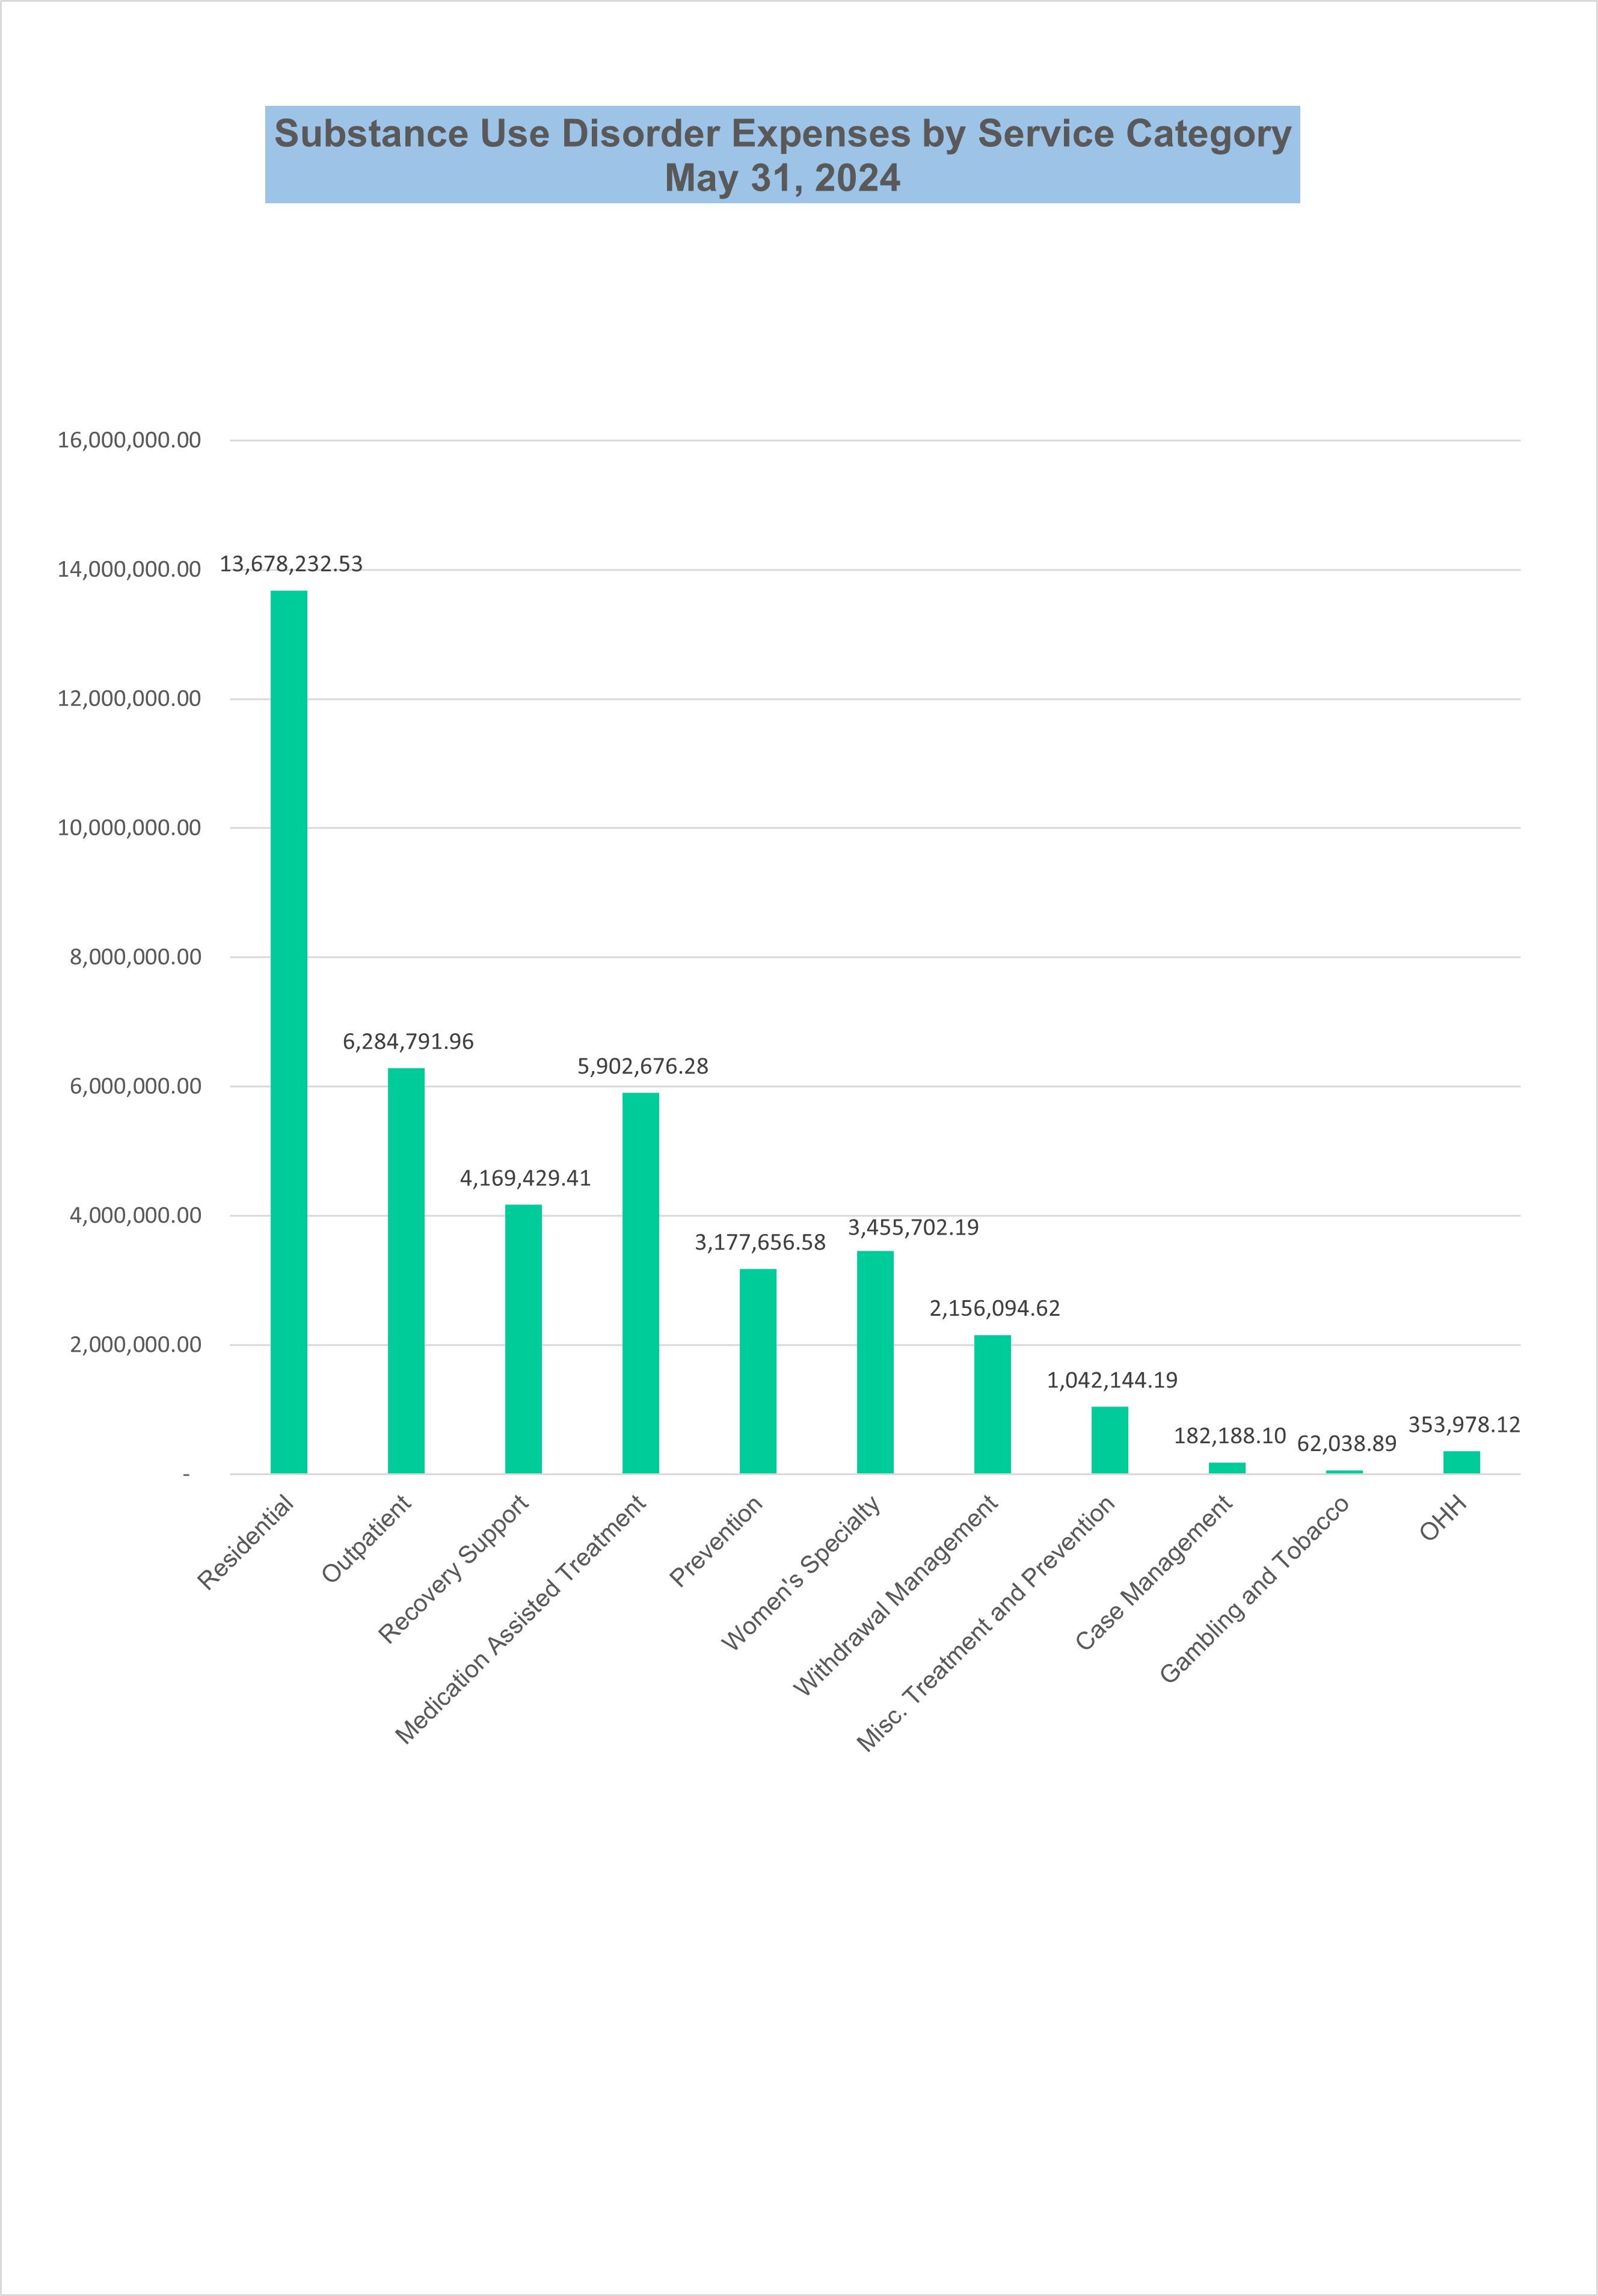 This graph represents funds spent for Substance Use Disorder (SUD) treatment and prevention services by category.